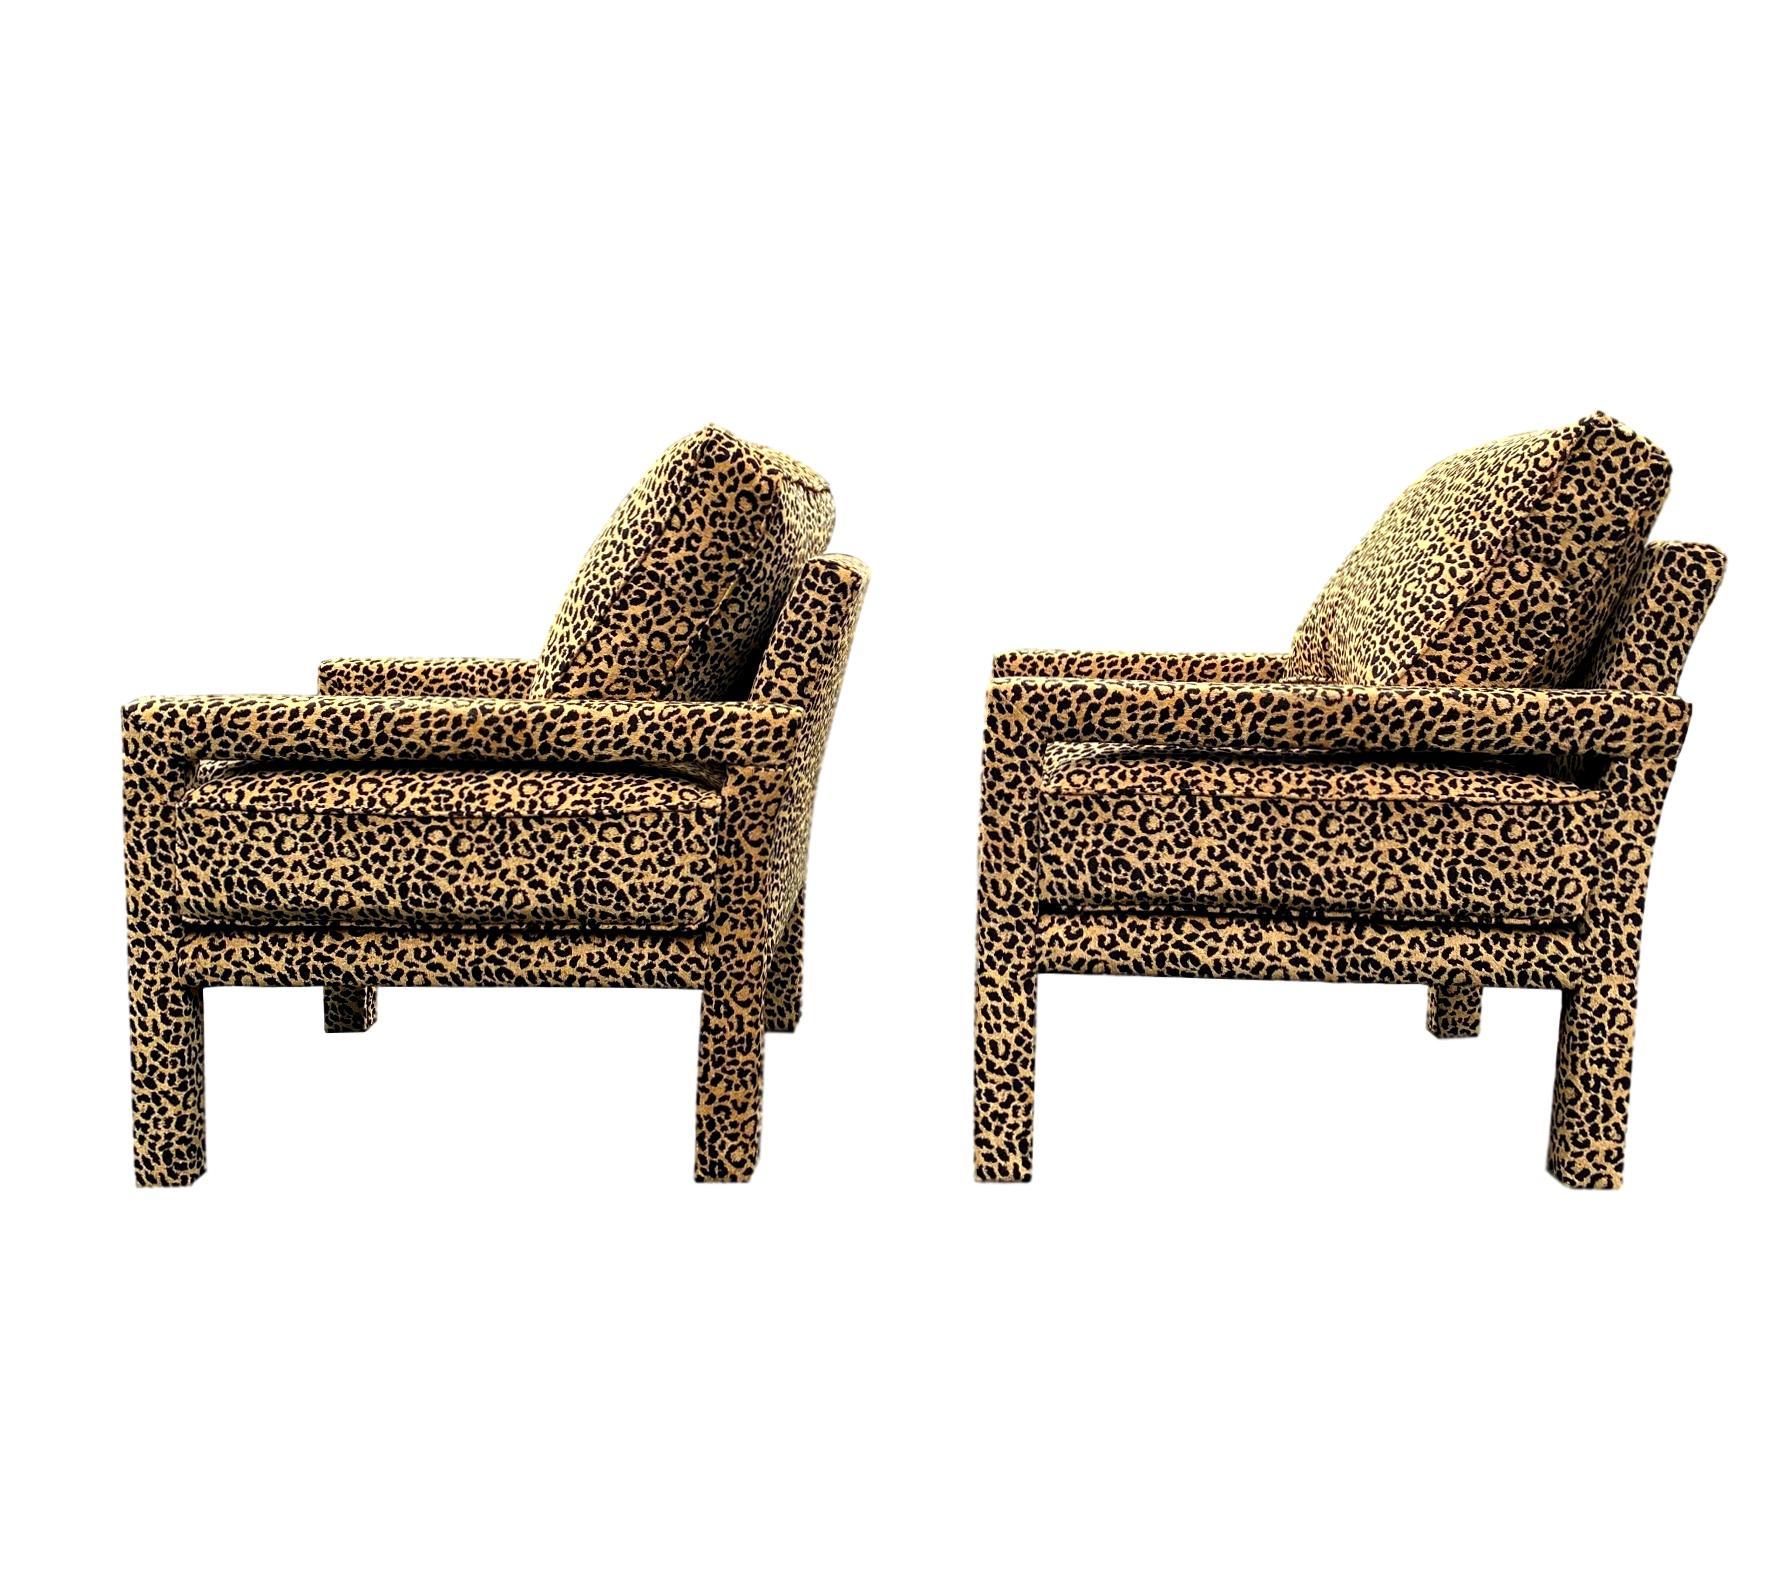 Pair of New Milo Baughman style iconic 'Parsons chairs' upholstered in ultra-luxurious leopard chenille. Our chairs are handcrafted and upholstered from new materials and new fabric by the best craftsmen and artisans in Morganton, NC, a center for